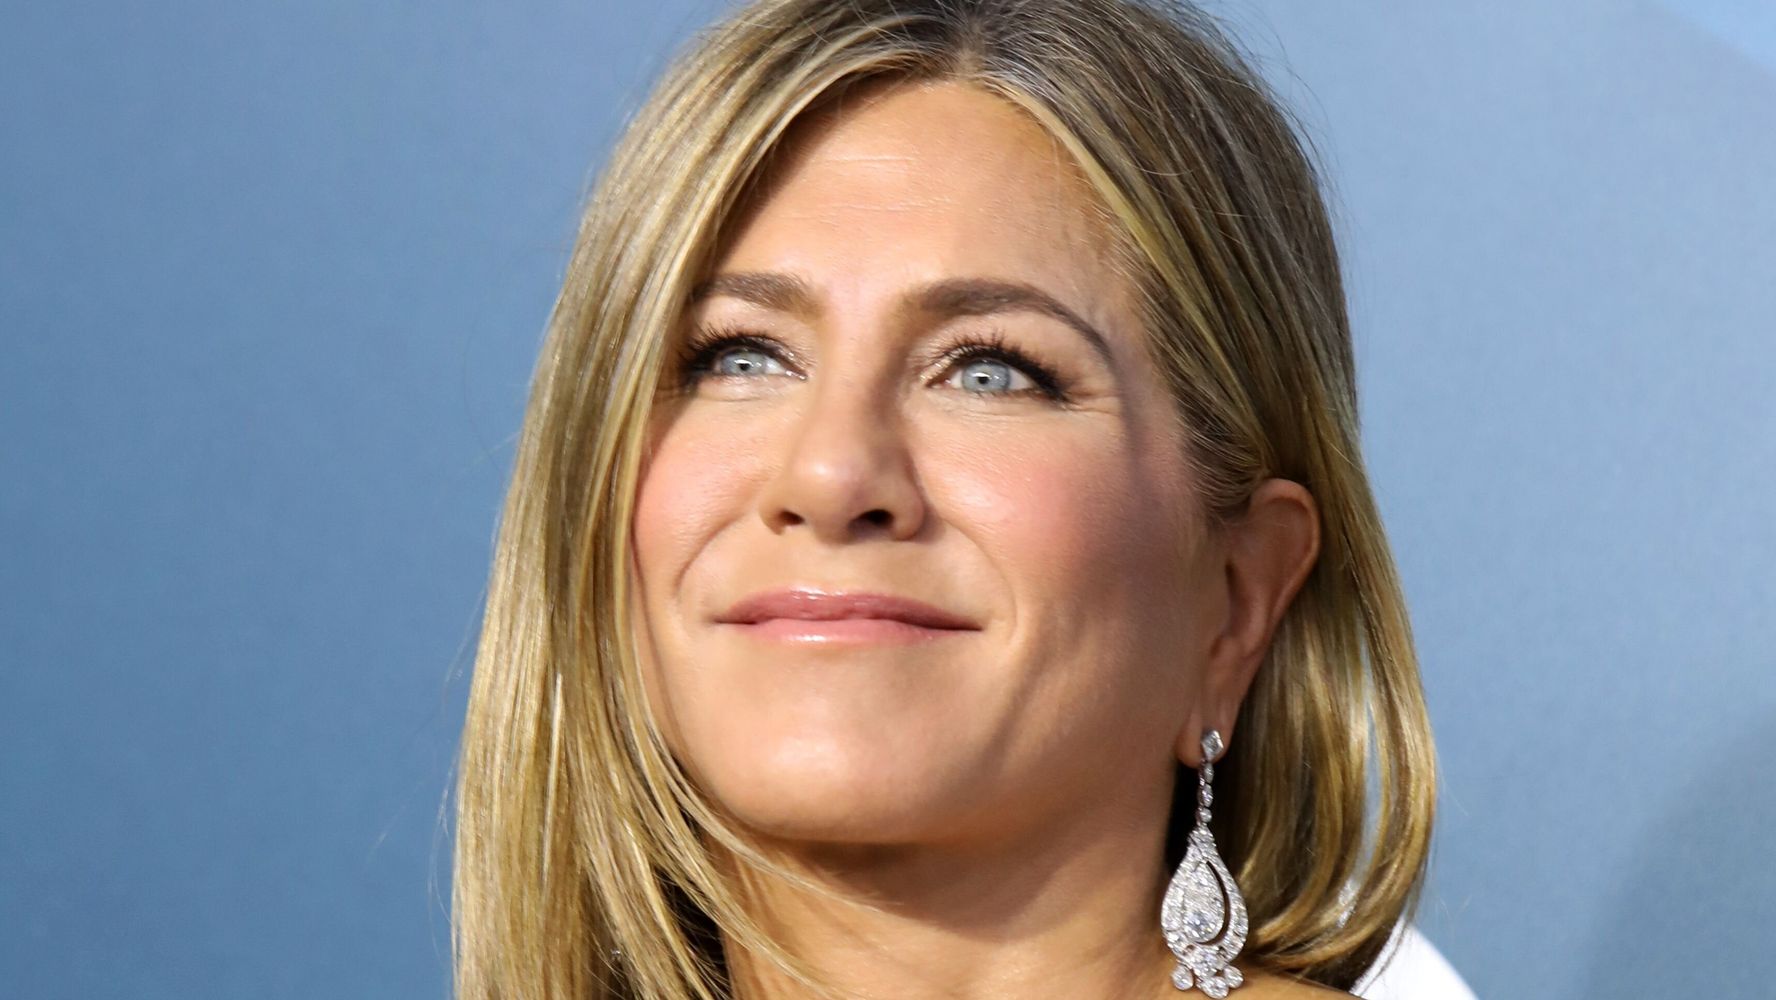 Voting For Kanye West Is ‘Not Funny,’ Warns Jennifer Aniston